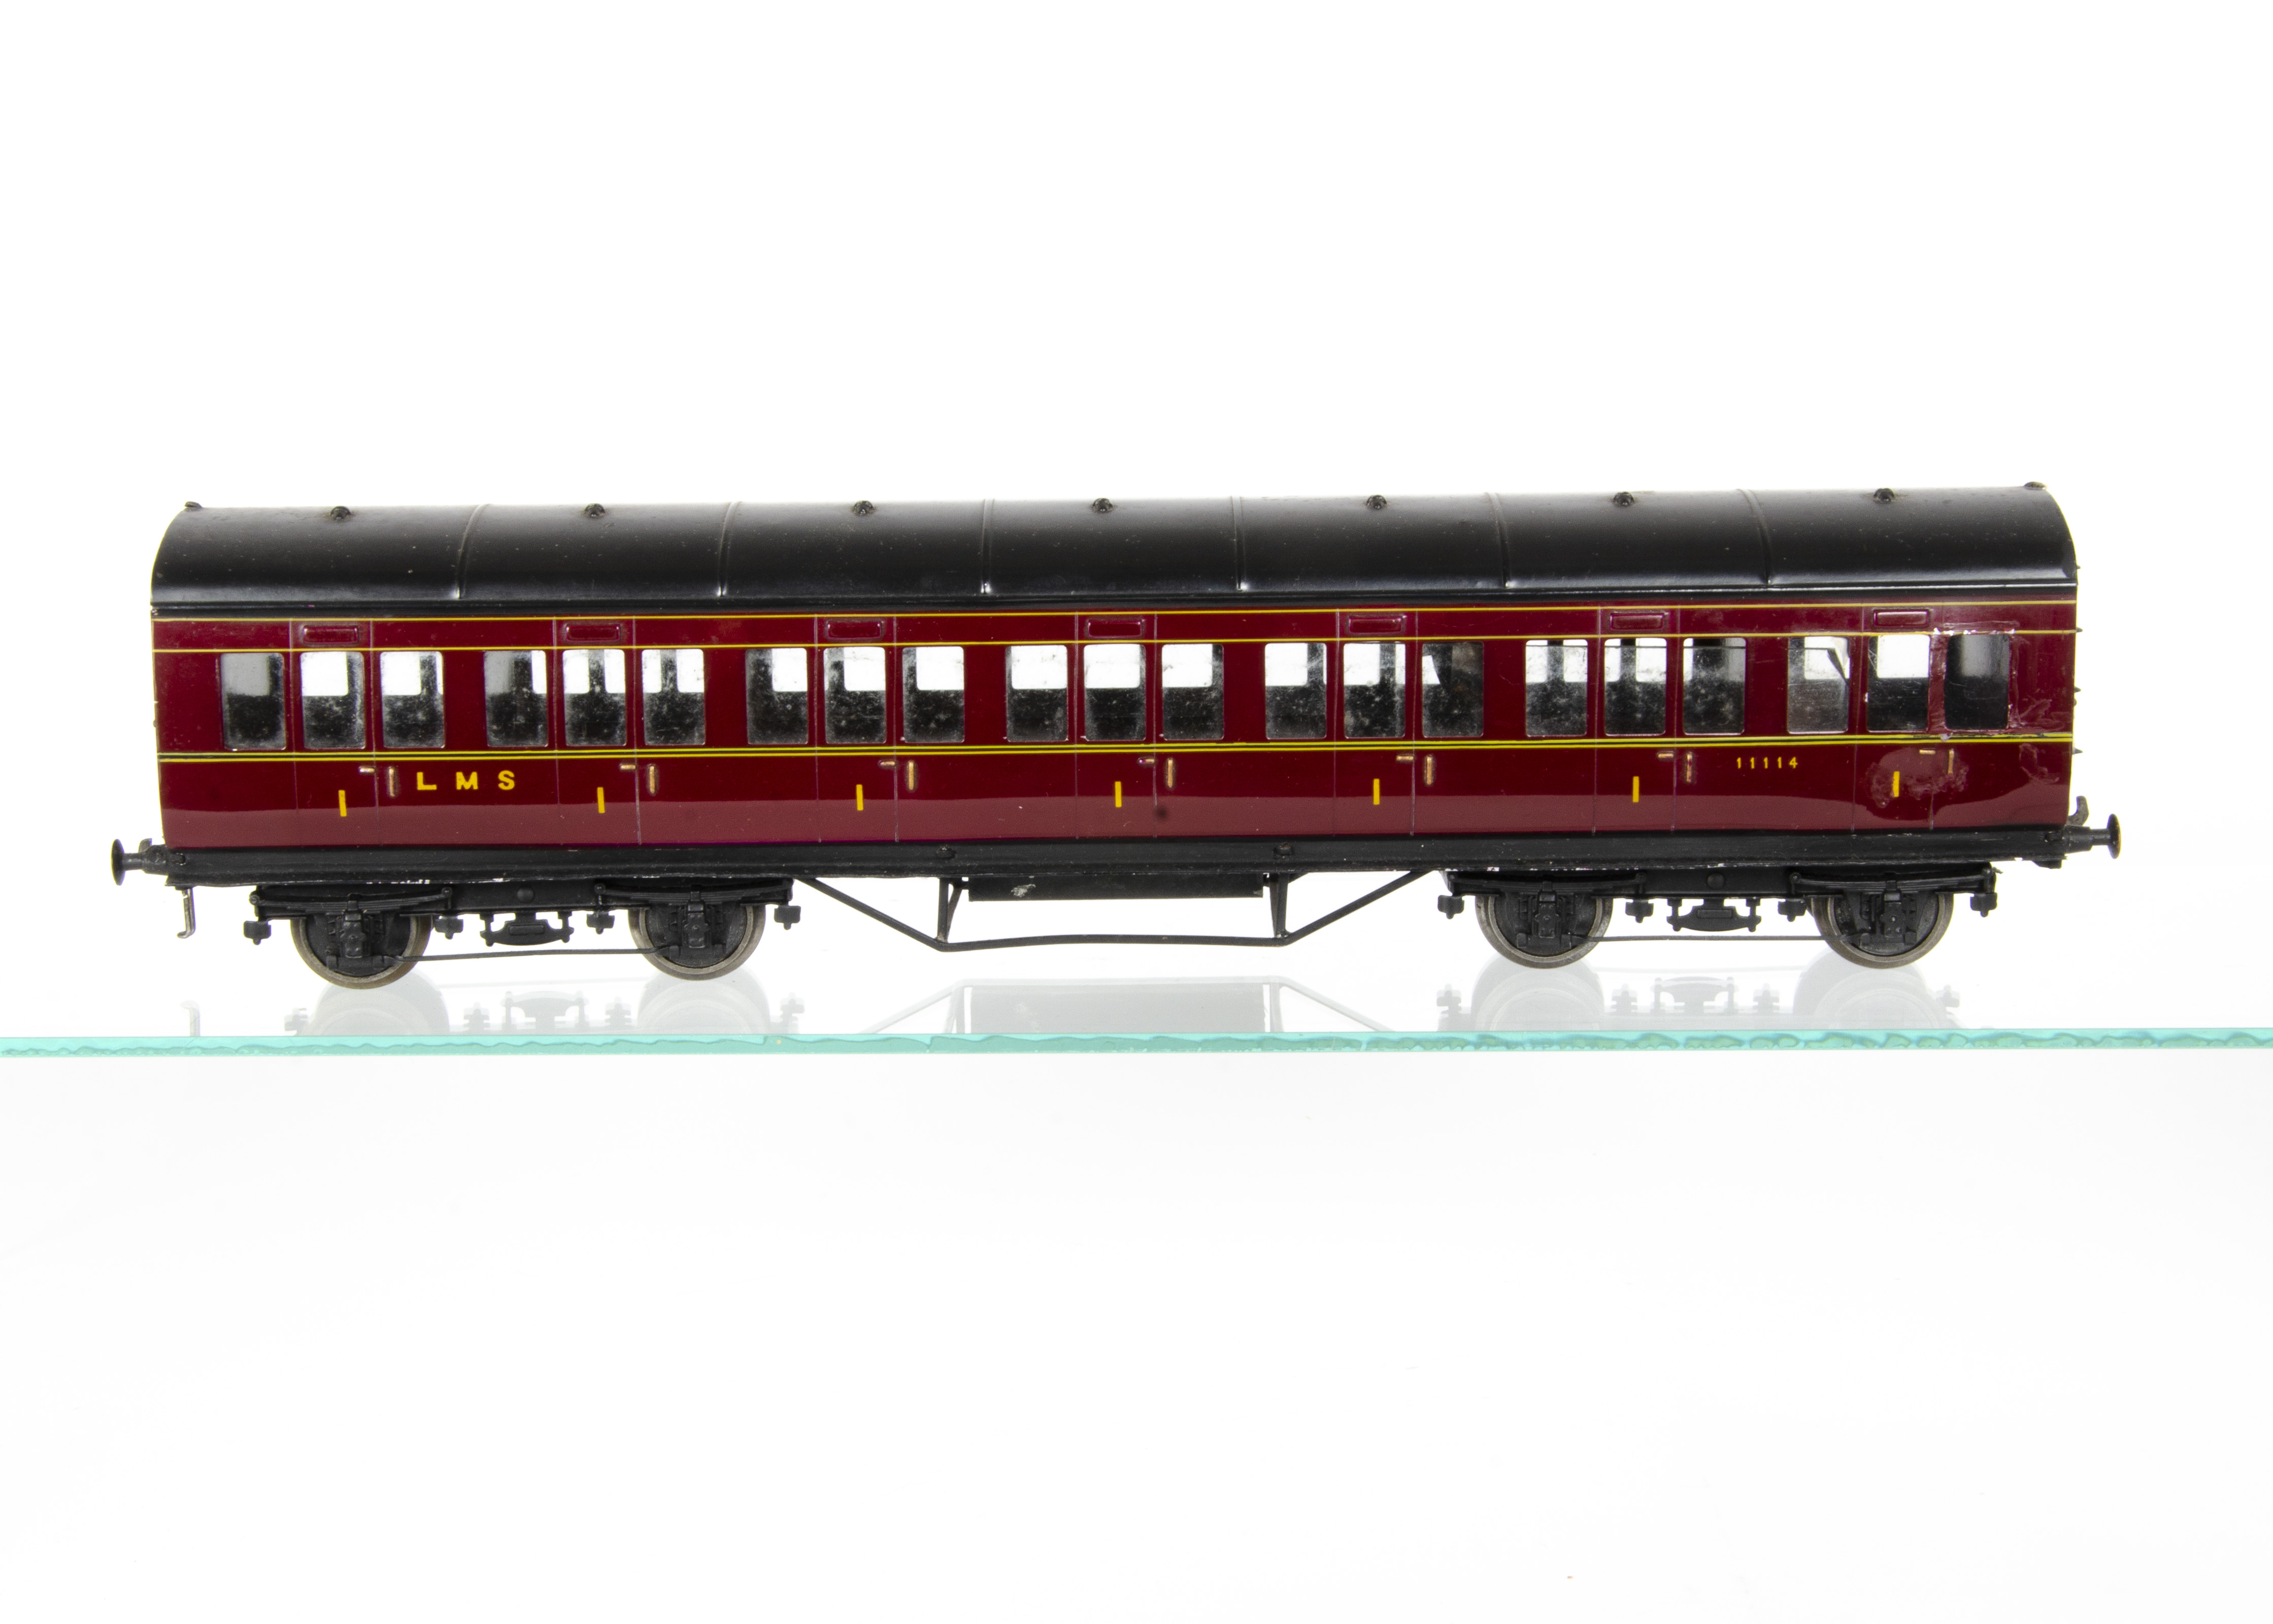 An Exley 0 Gauge LMS Suburban 50' 1st Class Coach, in LMS maroon as no 11114, F-G, significant